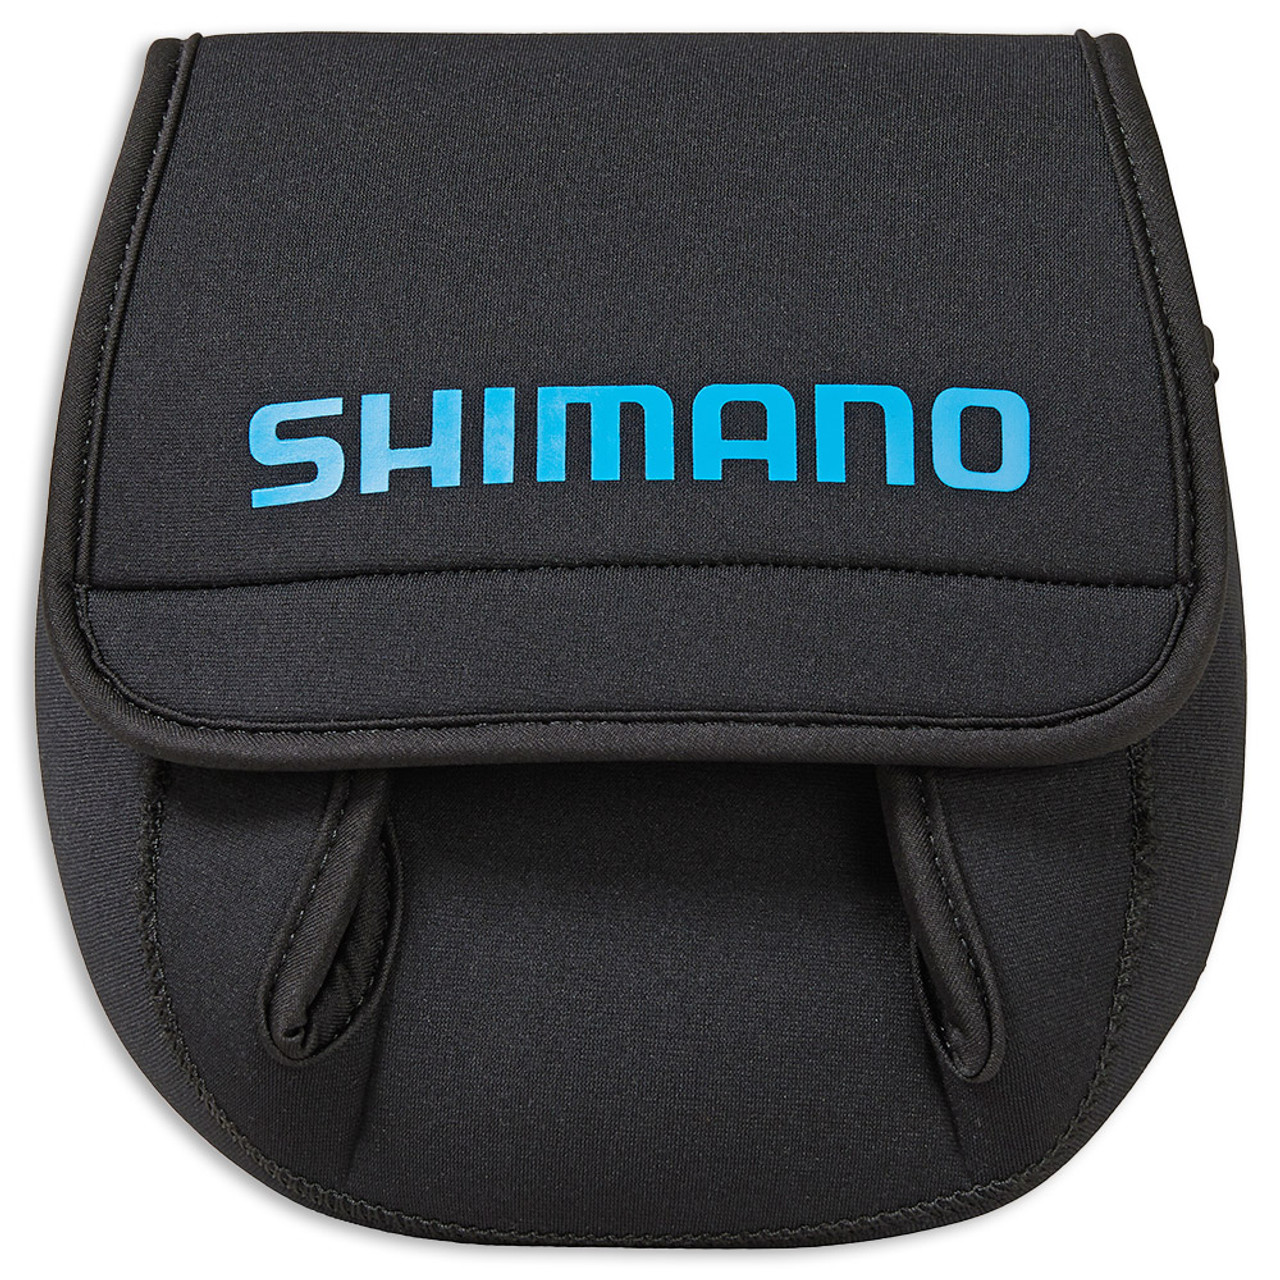 Shimano Reel Covers For Sale - Spin, Overhead or Tiagra Cover